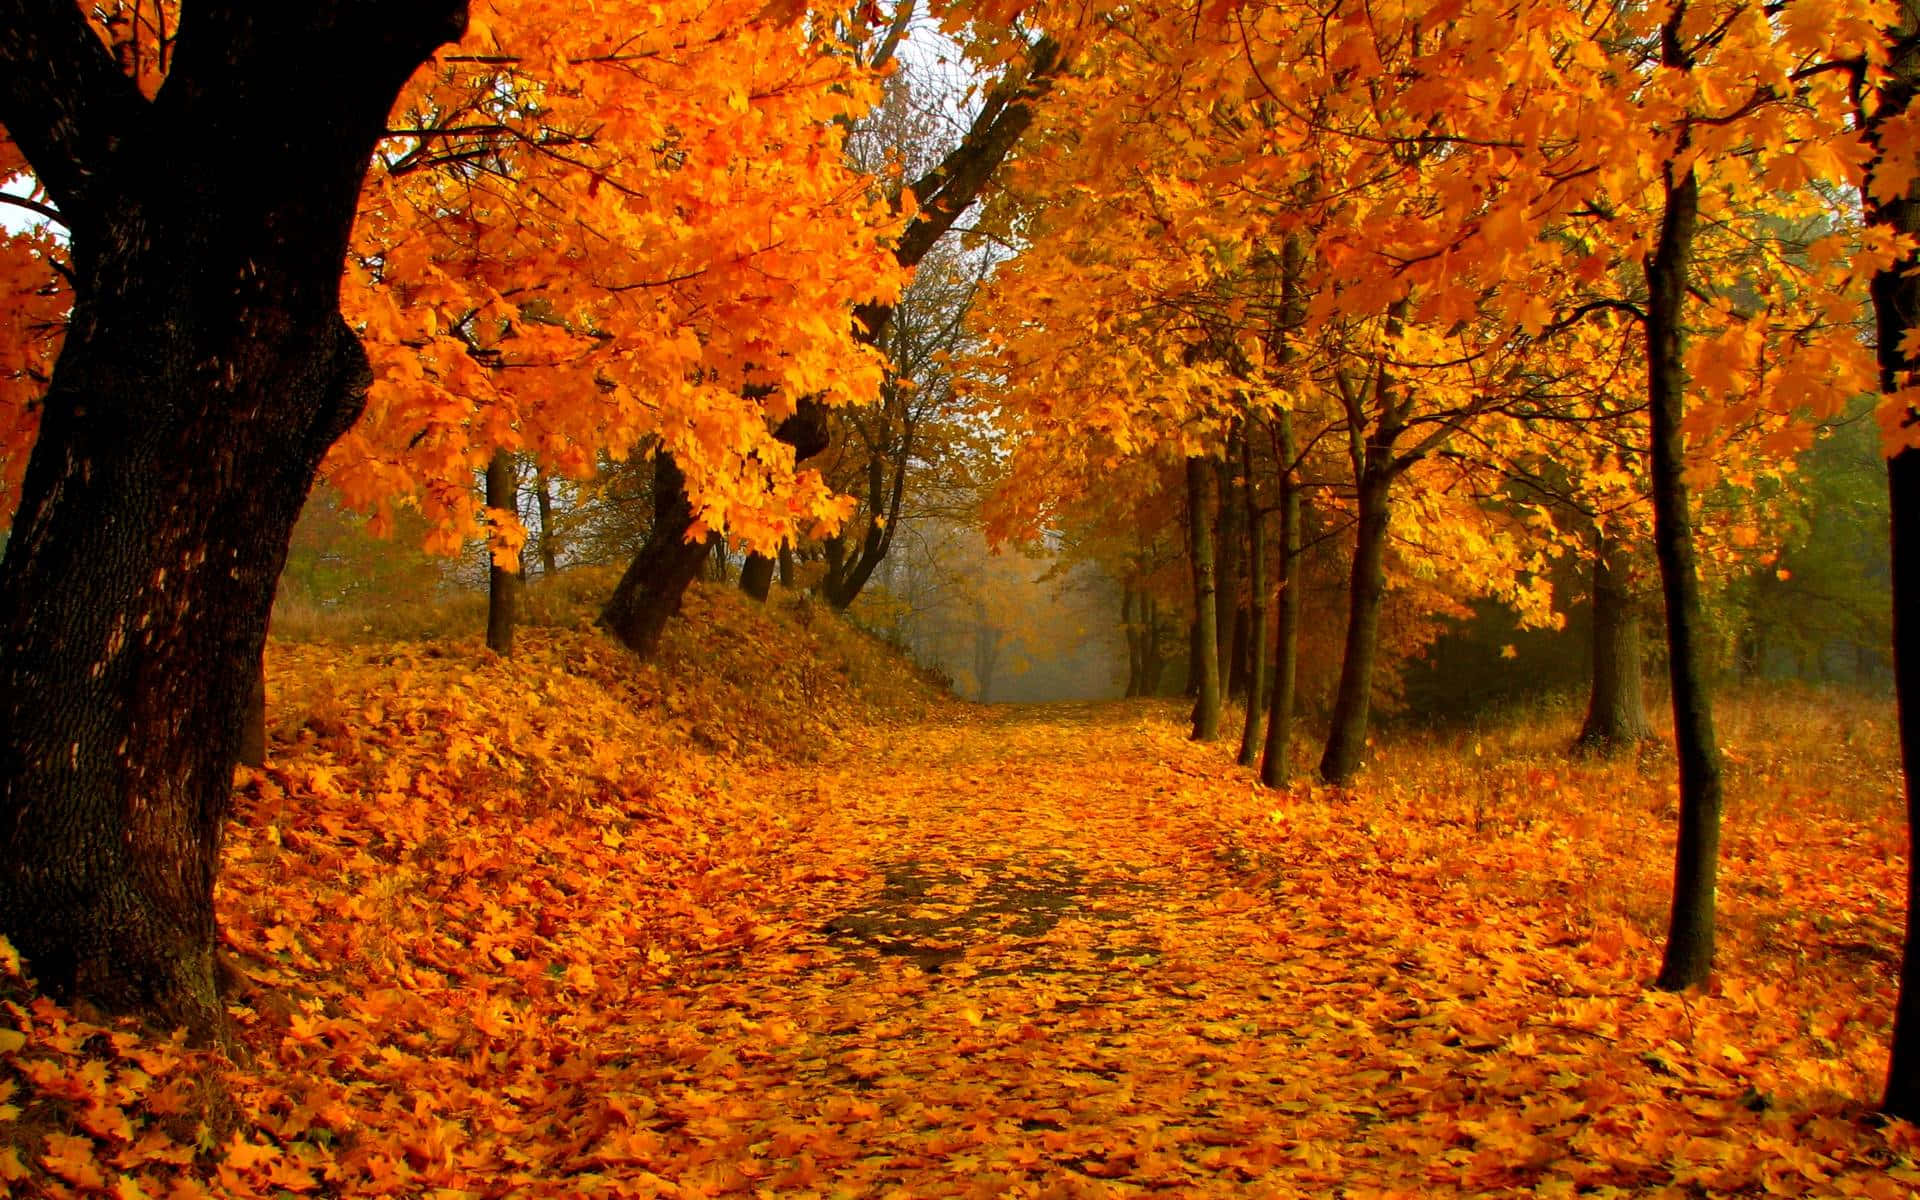 Autumn Serenity: A color cascade in the forest Wallpaper